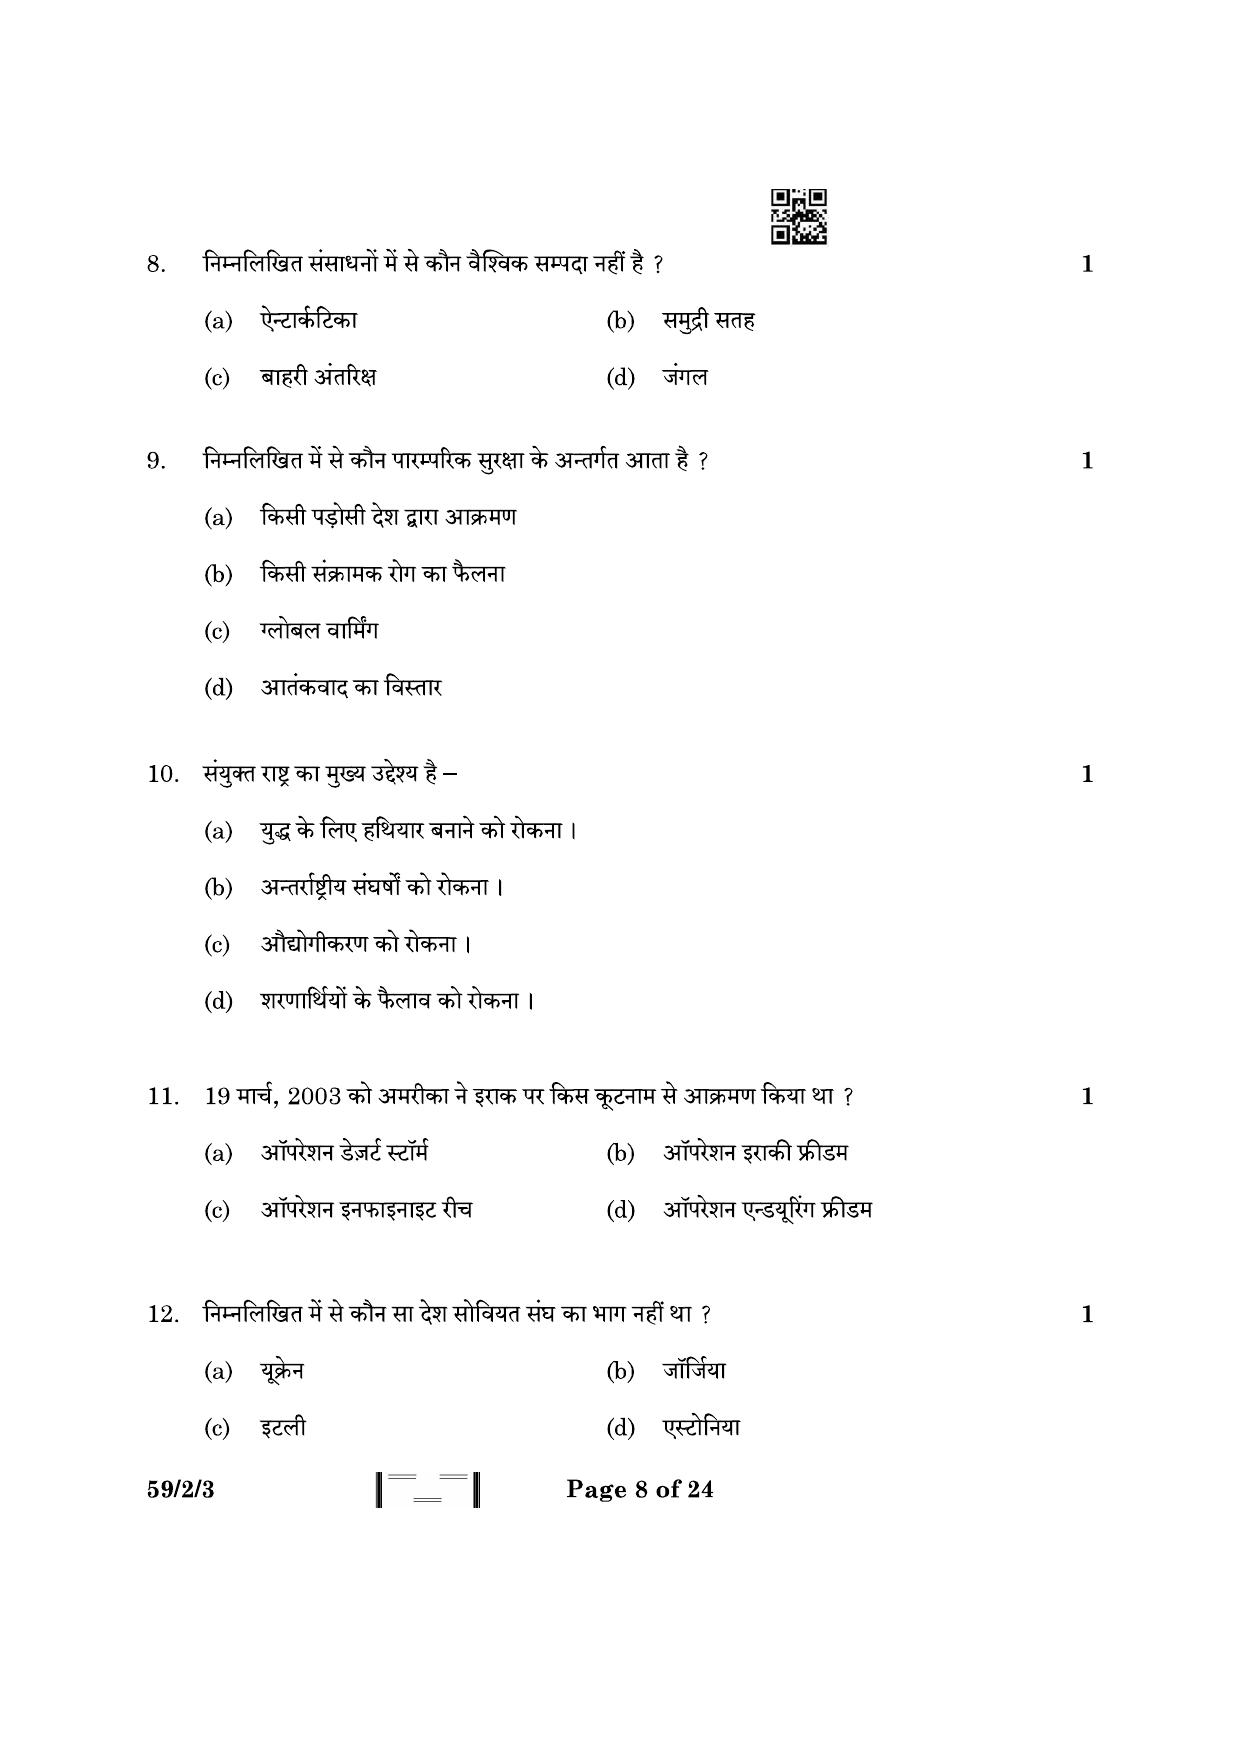 CBSE Class 12 59-2-3 Political Science 2023 Question Paper - Page 8